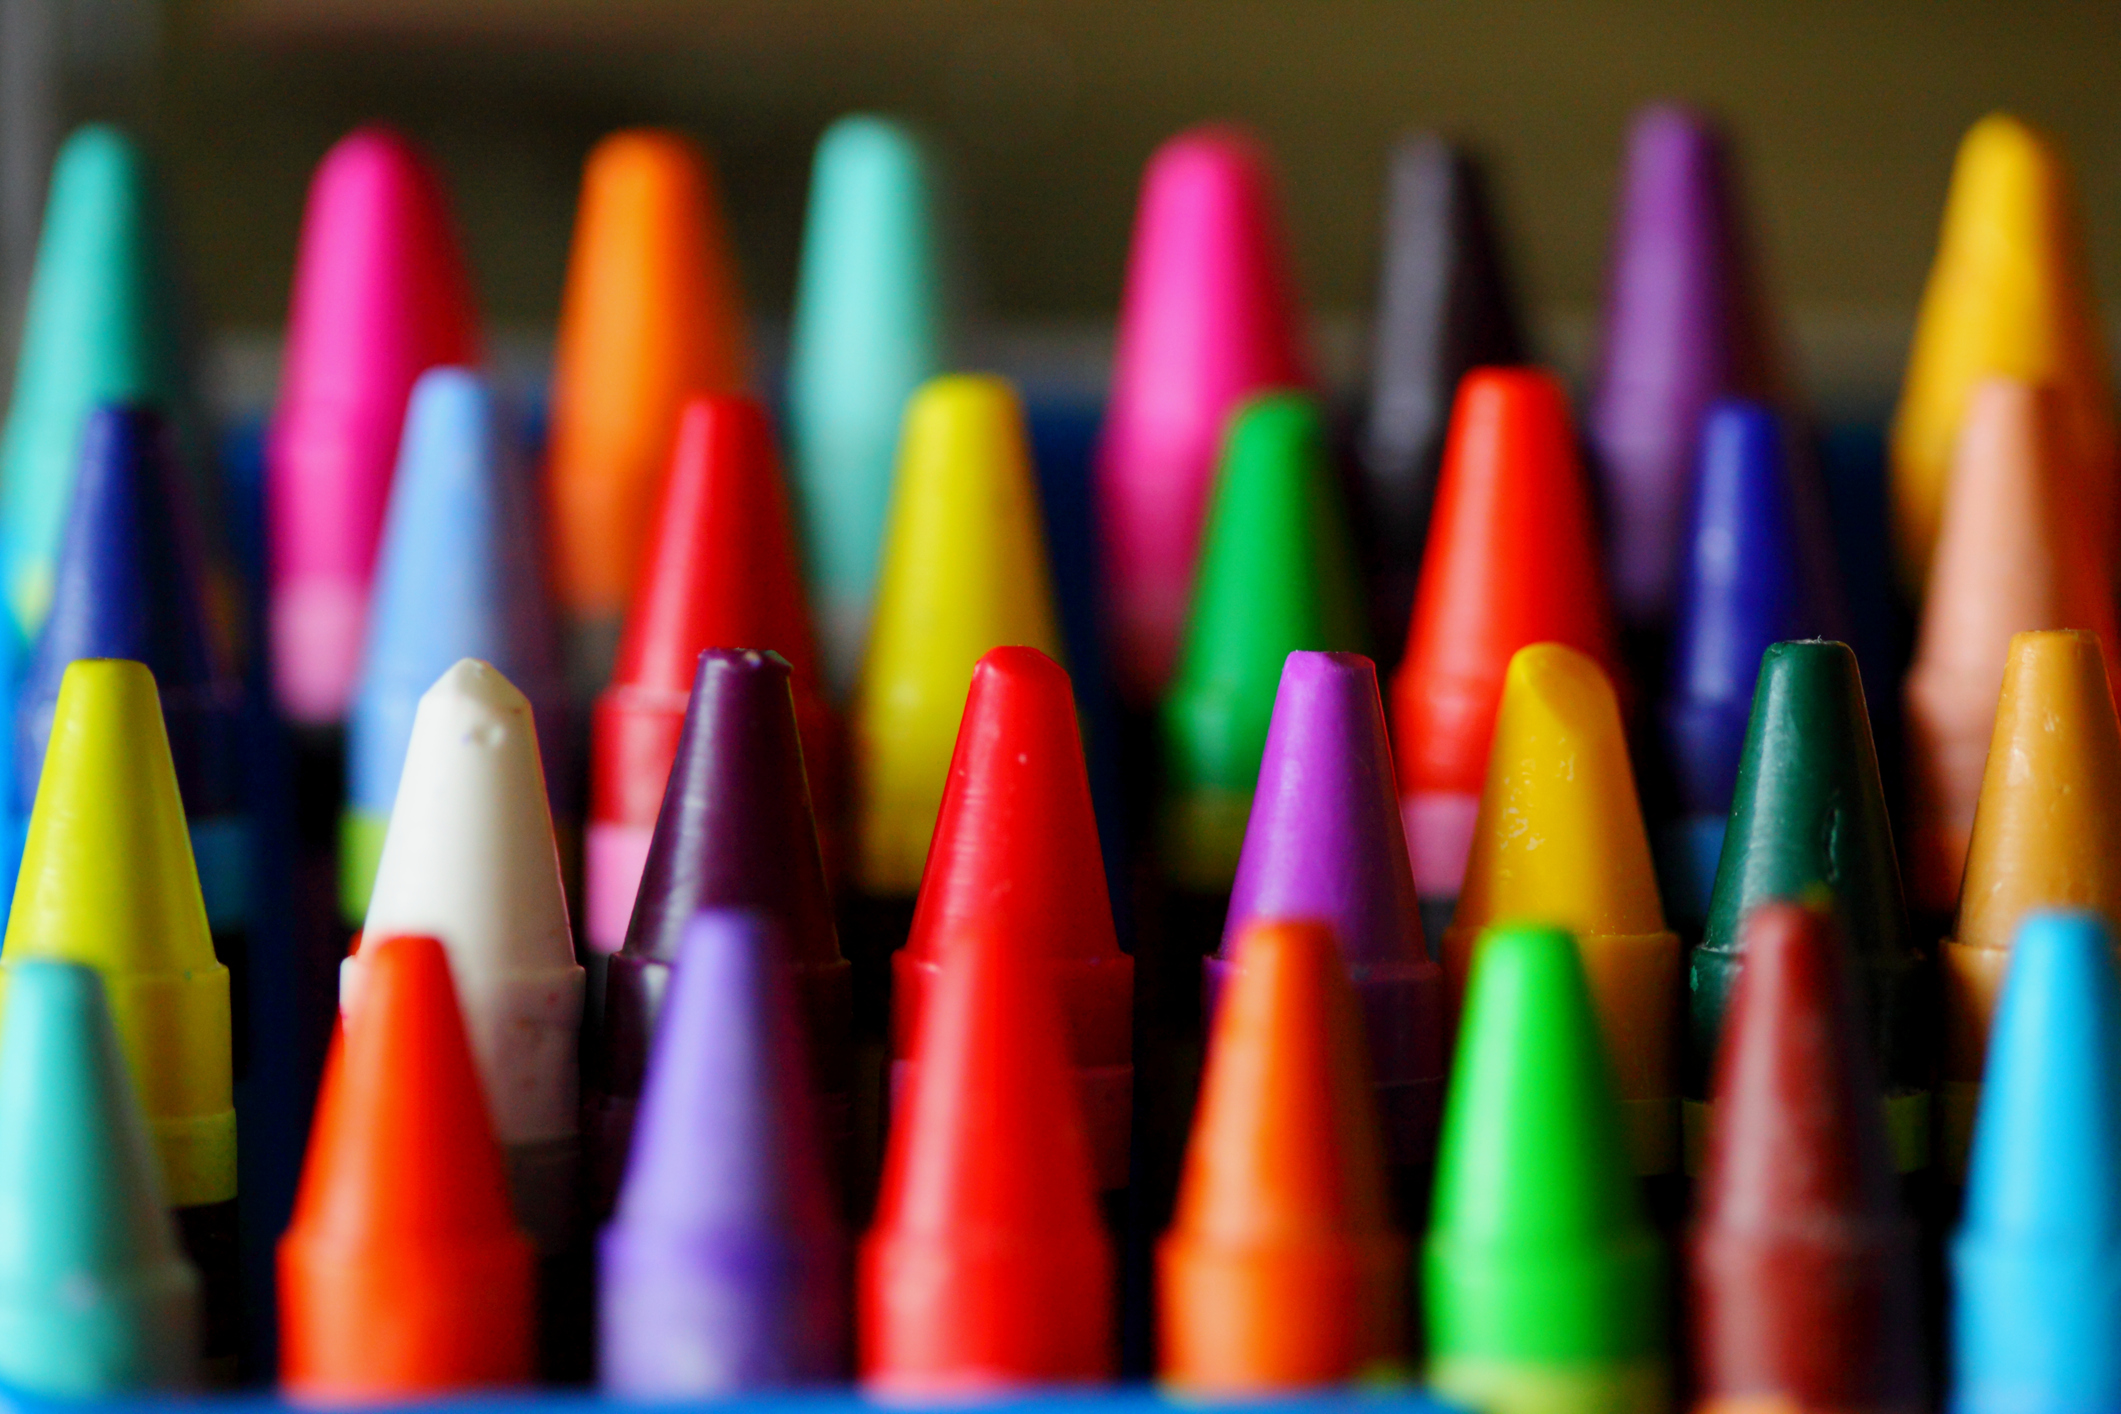 PHOTO: Box of colorful crayons are pictured in this undated stock photo.